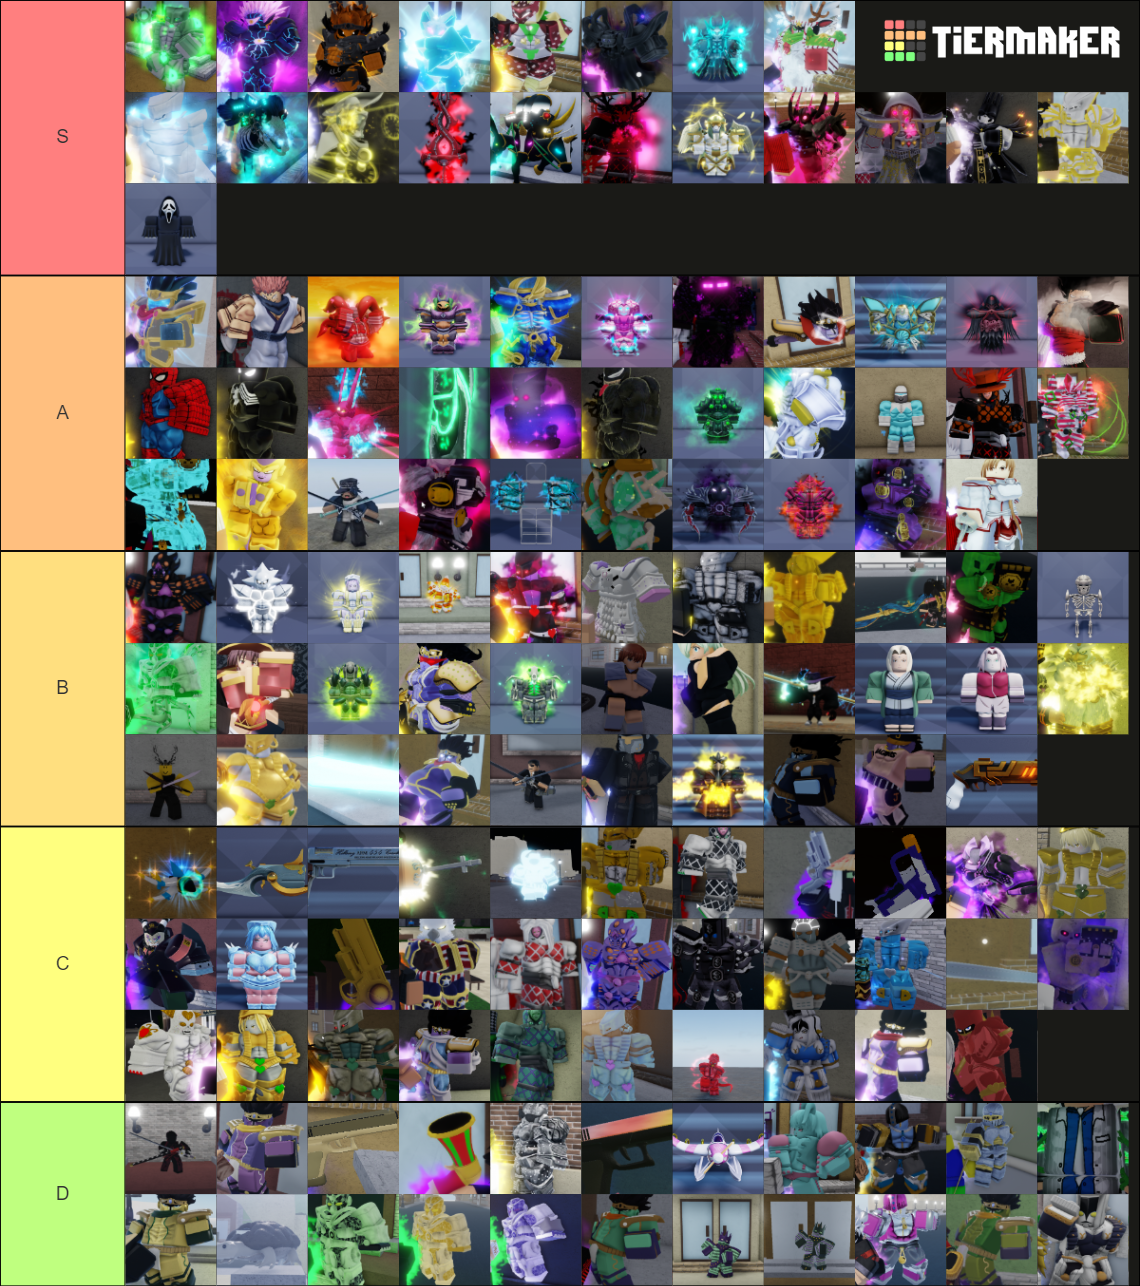 Create a YBA Shiny Stands Tier List - TierMaker